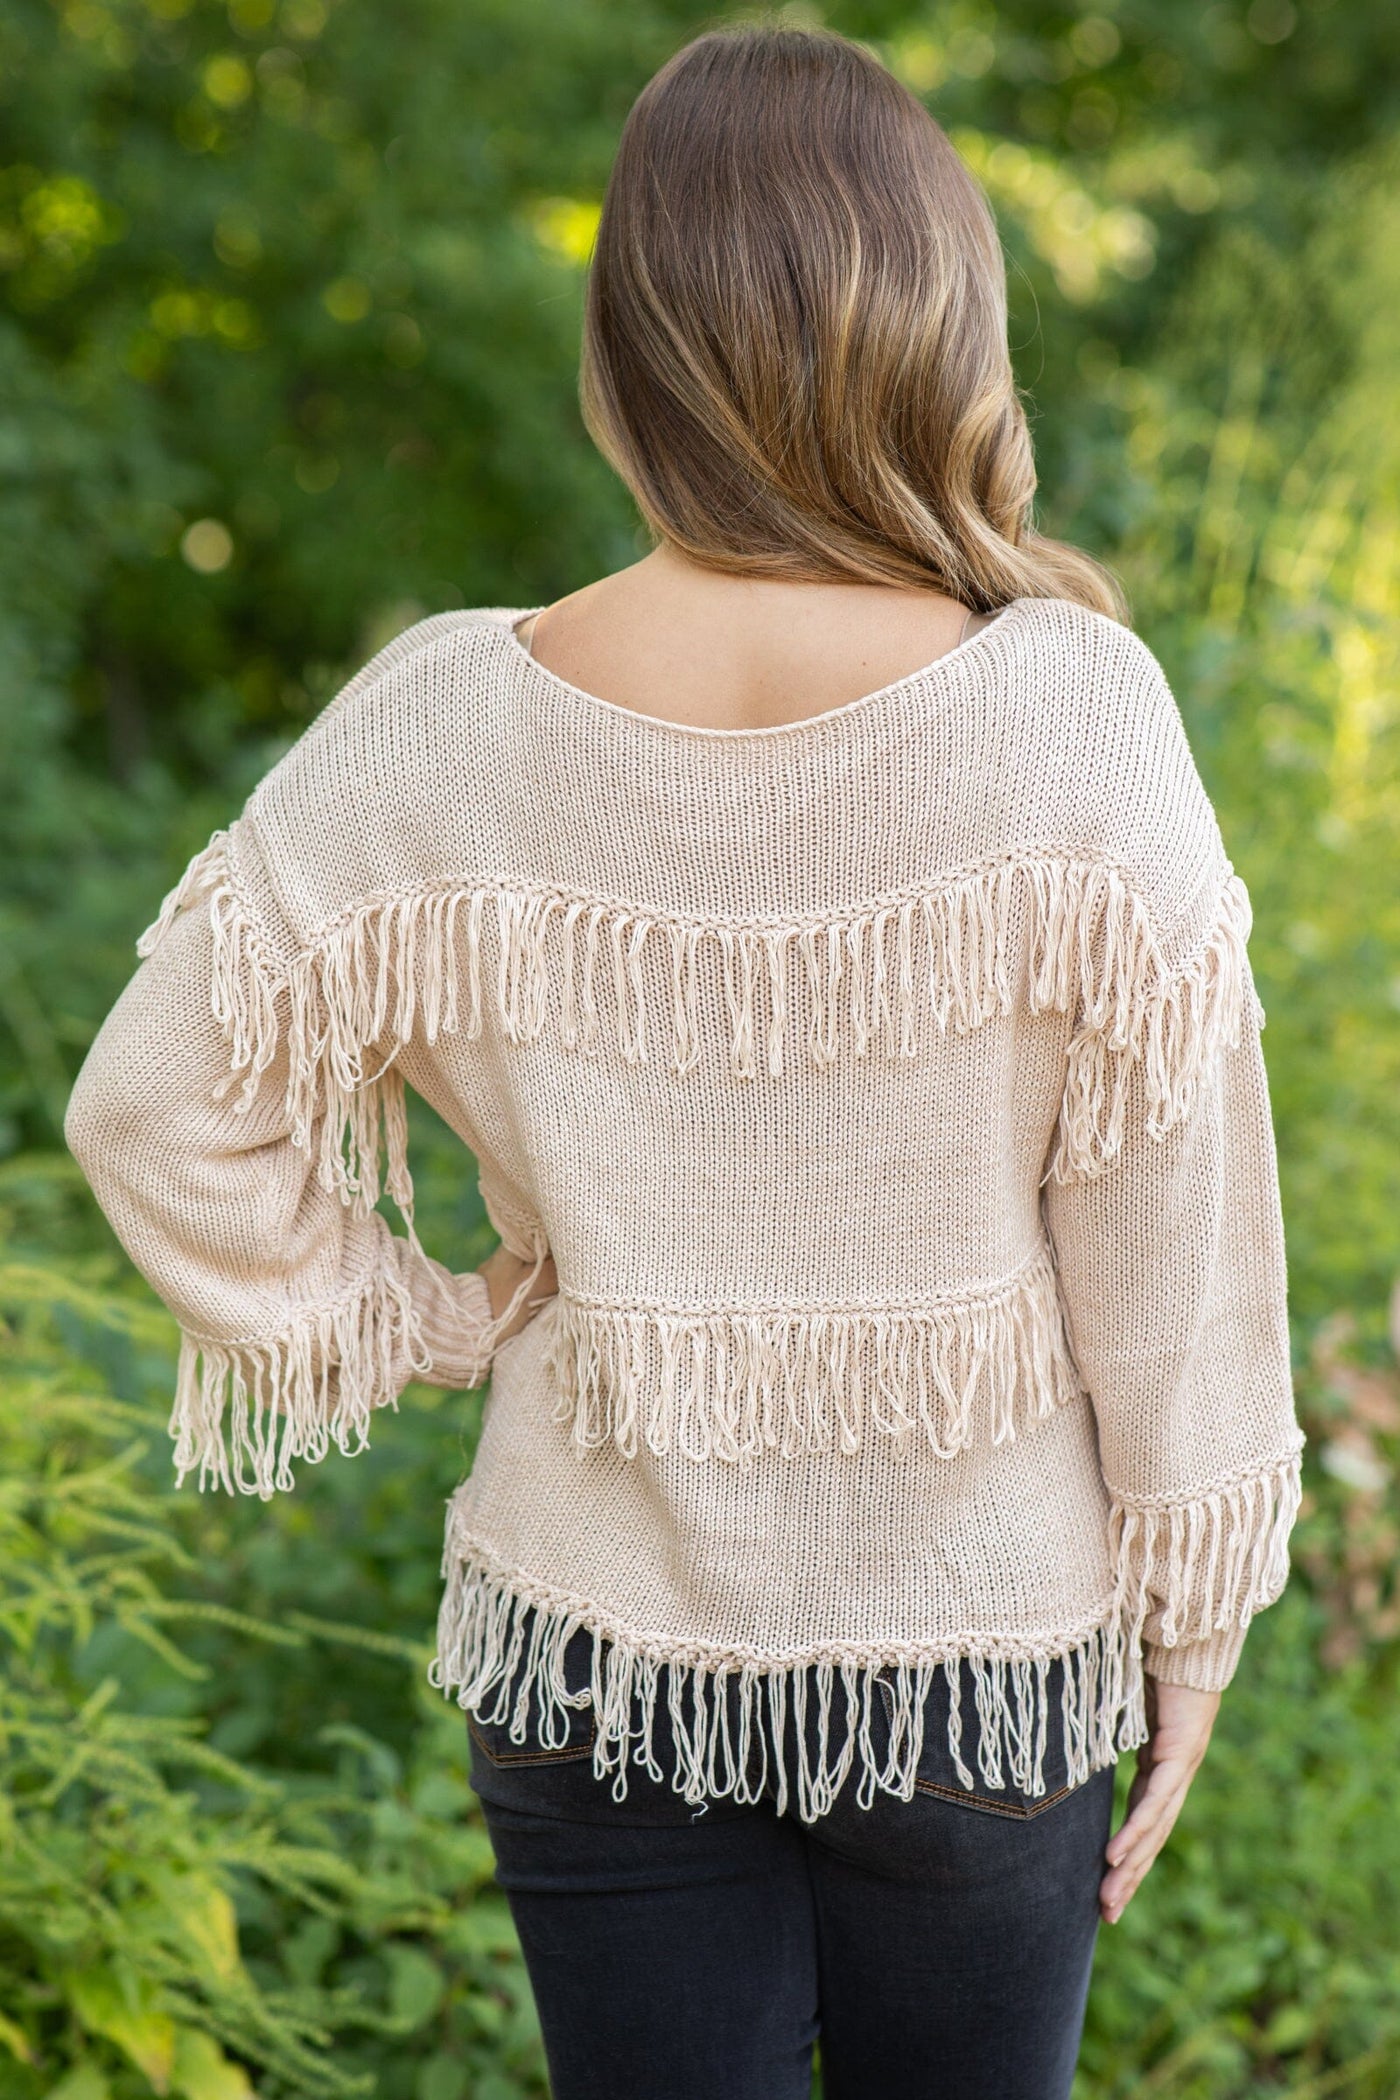 Tan Lightweight Sweater With Fringe Detail - Filly Flair